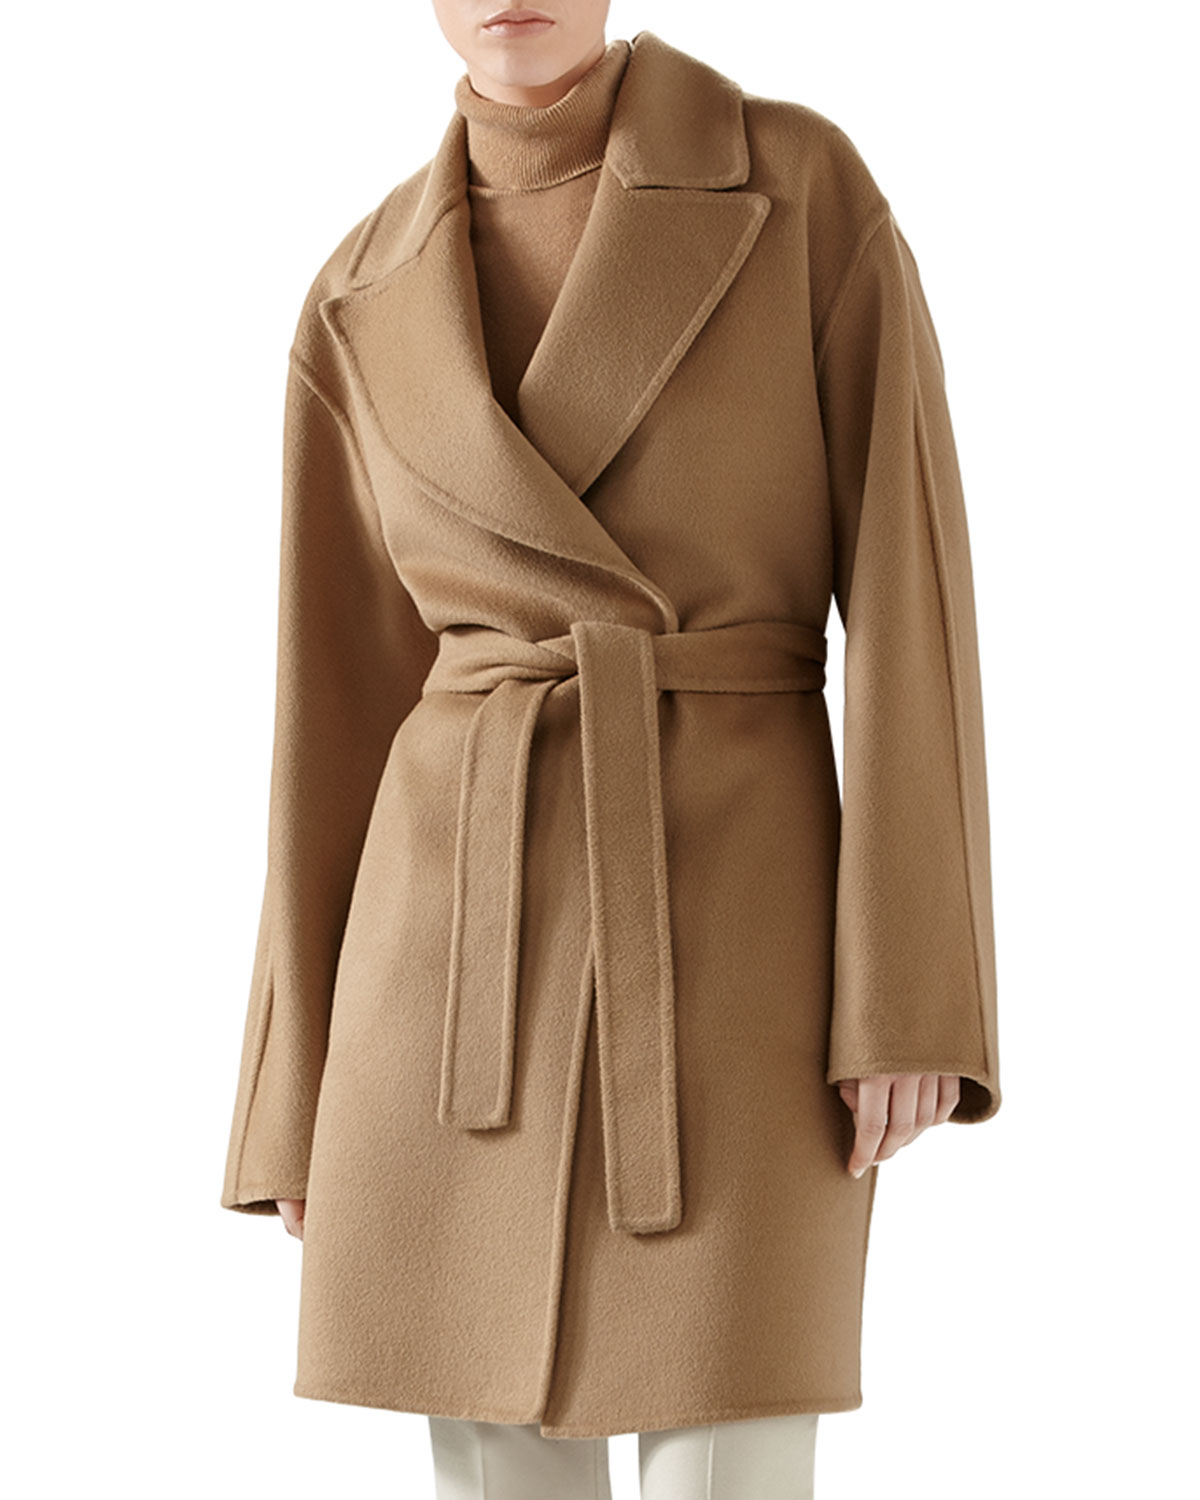 Gucci Double Wool Wrap Coat in Camel (Brown) - Lyst